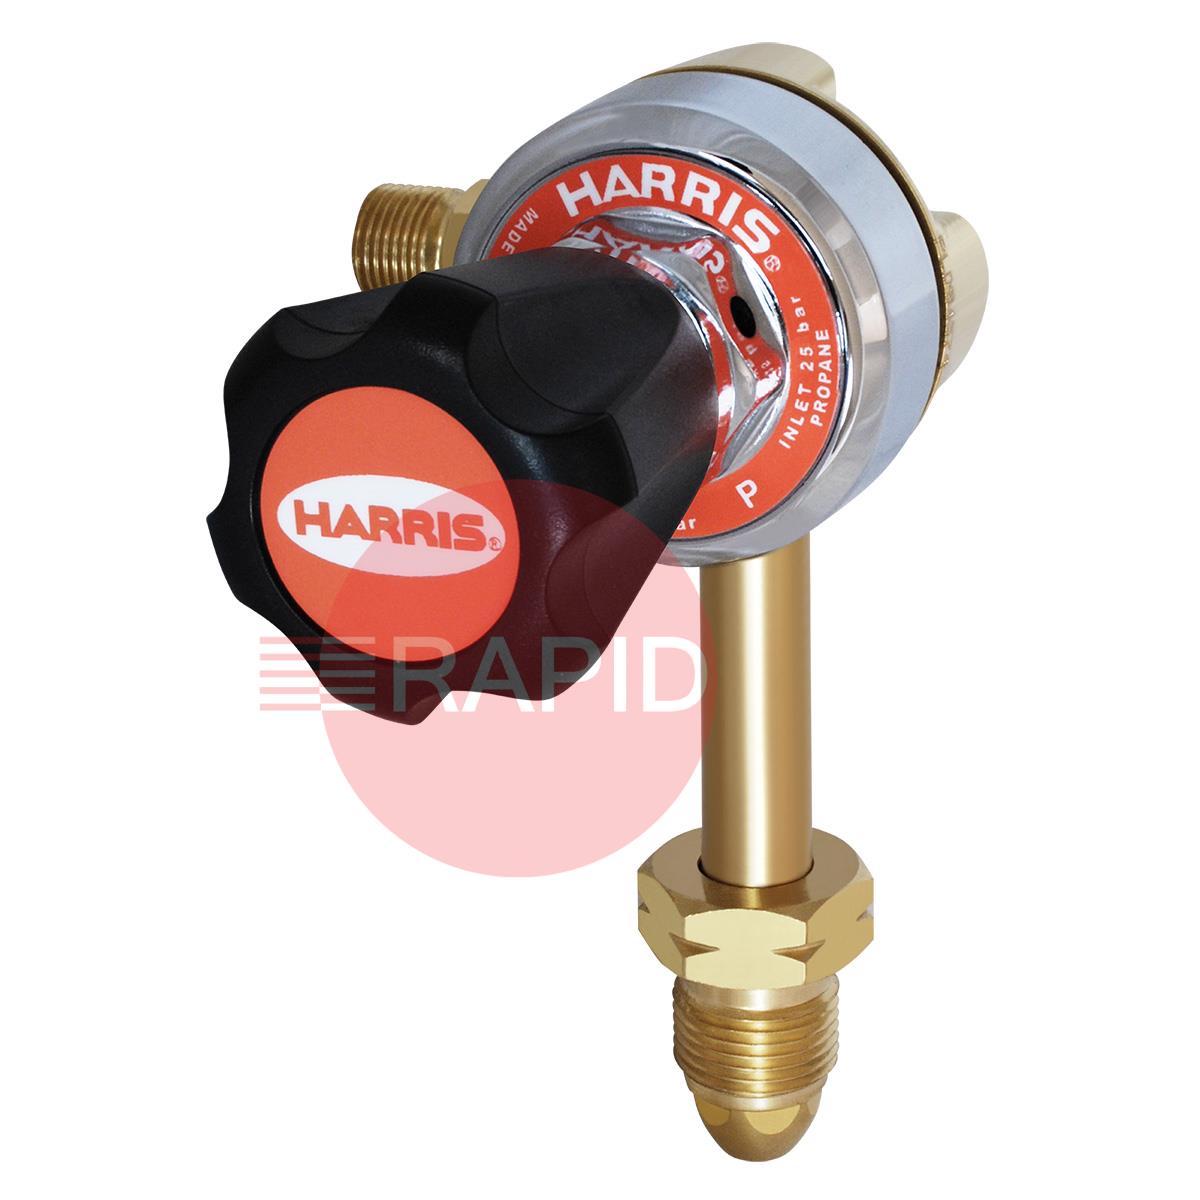 H1003  Harris 818 Propane (Extended Stem) Single Stage Gaugeless 4.0 Bar, 5/8 BSP LH Cylinder Connection, 3/8 BSP Outlet, UK Fitting Only